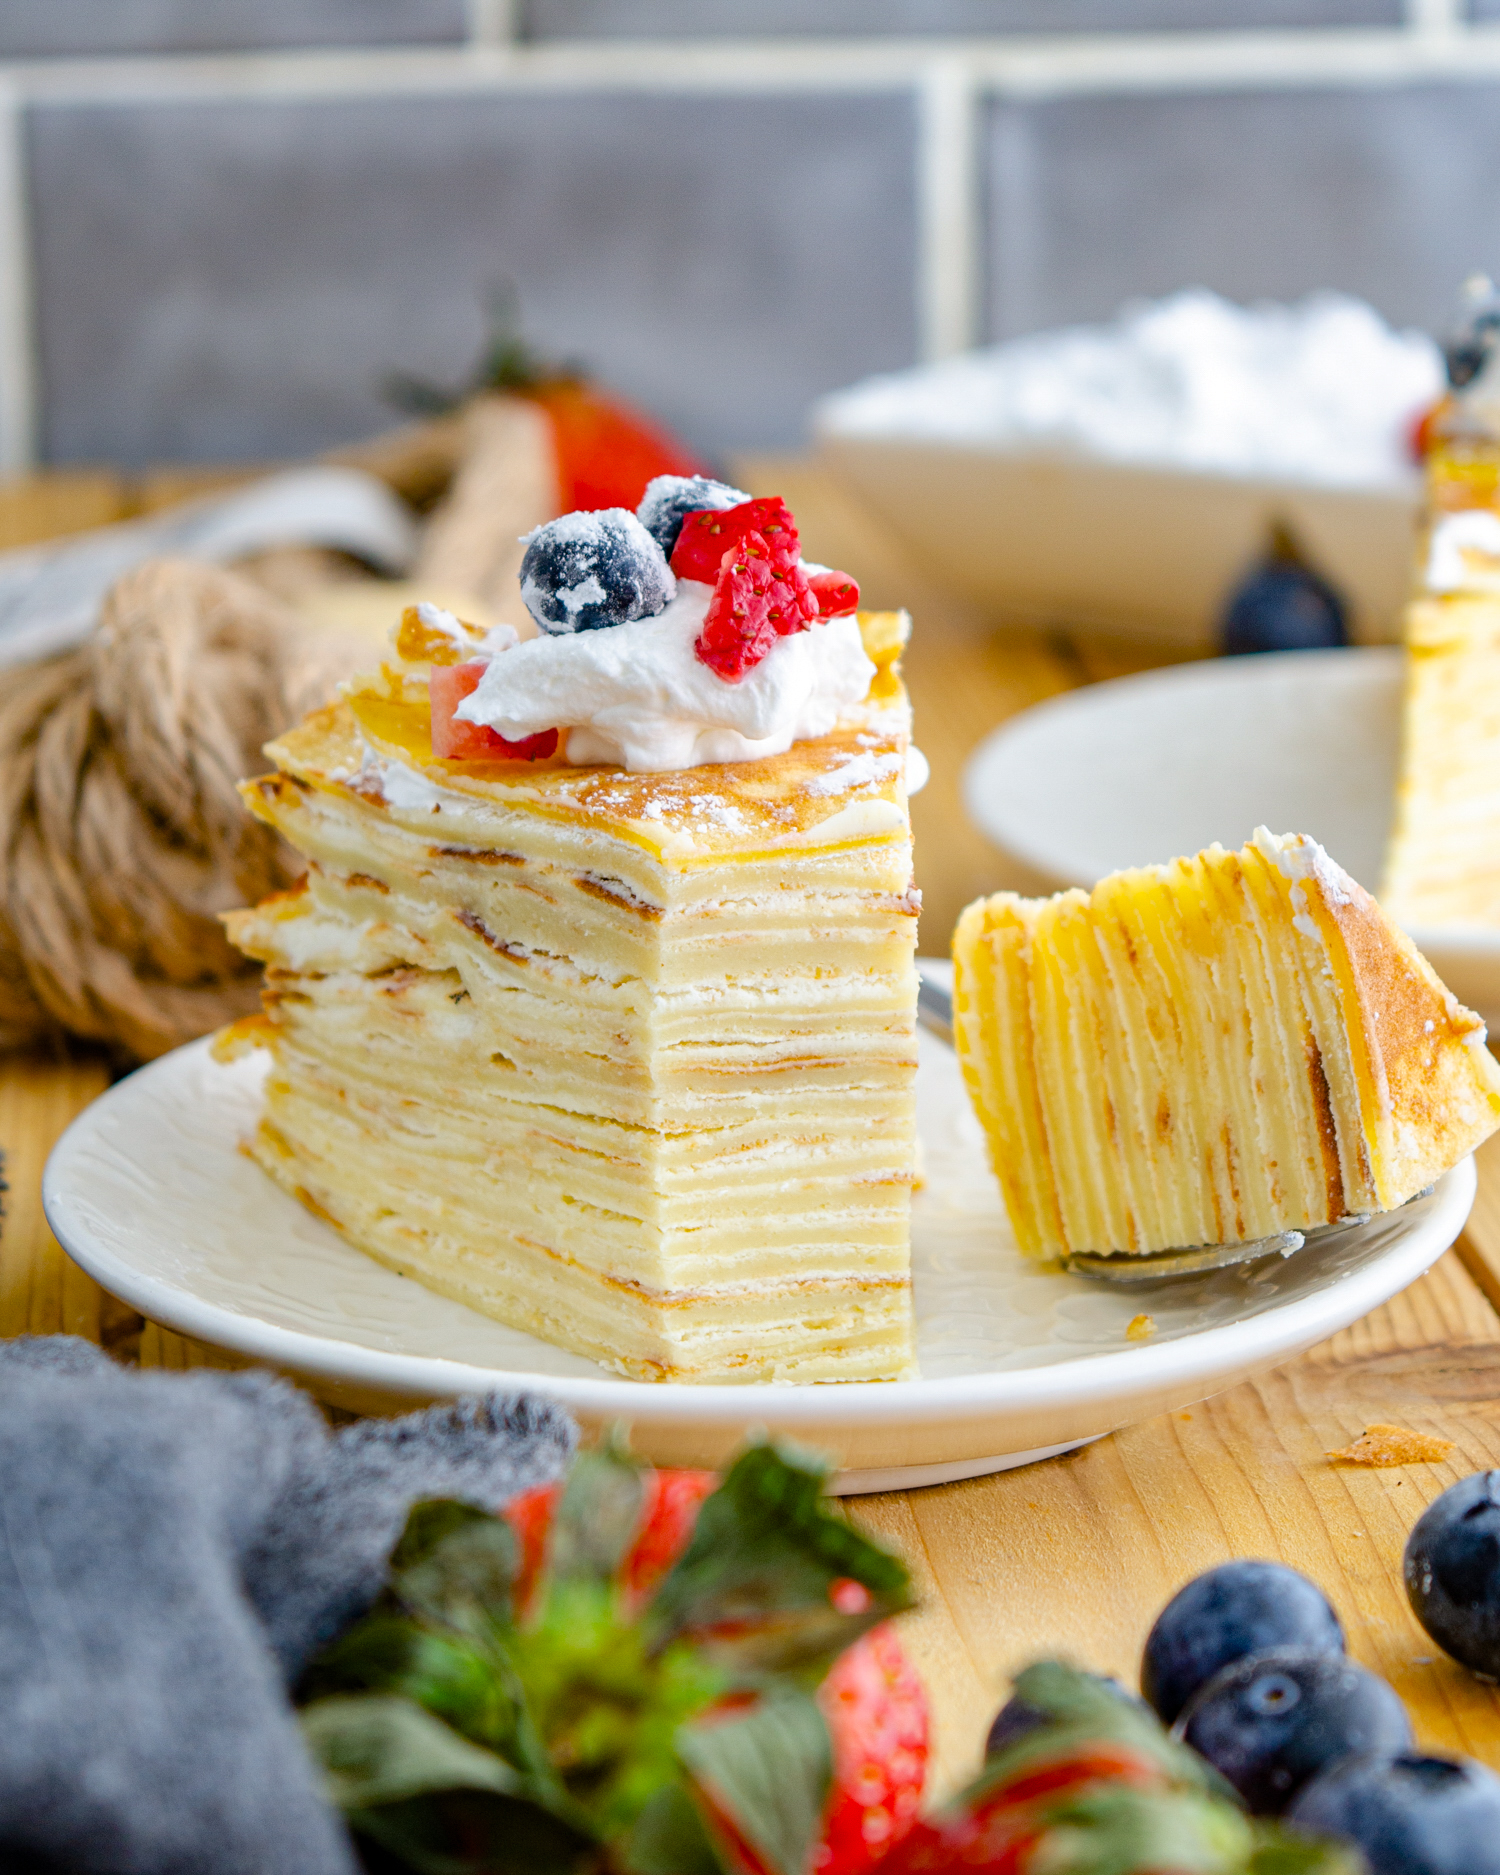 Layered crepe cake, French crepe cake, Mille crepe, Crepe layered cake, Crepe Cake